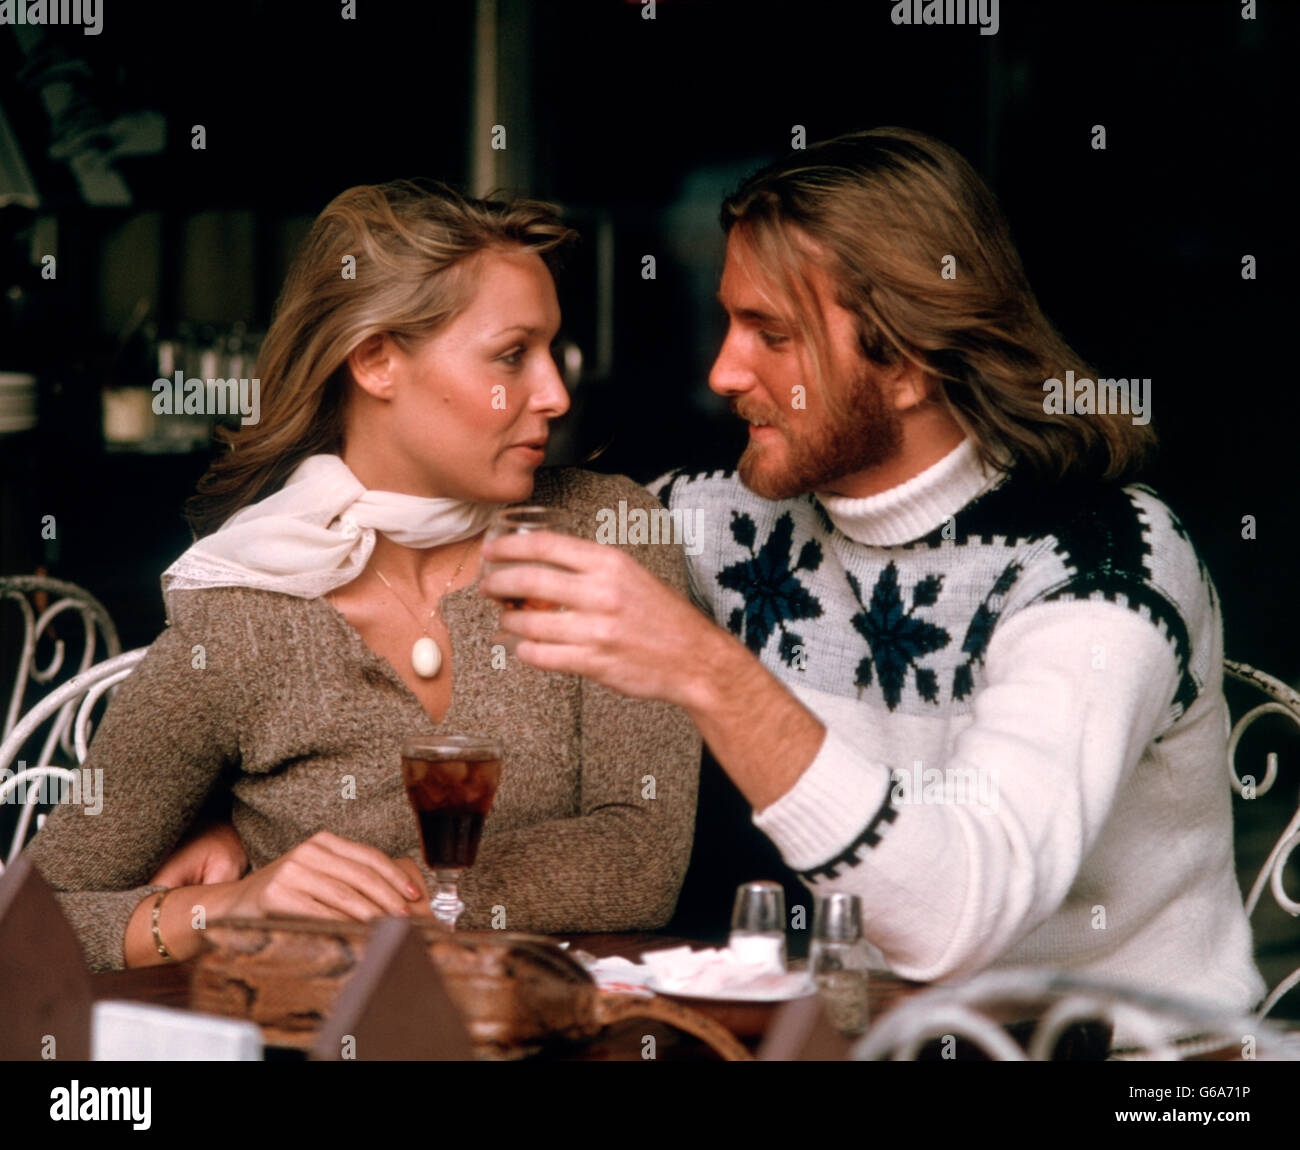 1970s ROMANTIC COUPLE MAN WOMAN WITH DRINKS SITTING IN OUTDOOR CAFE BOTH WEARING SWEATERS MAN HAS LONG HAIR AND BEARD Stock Photo